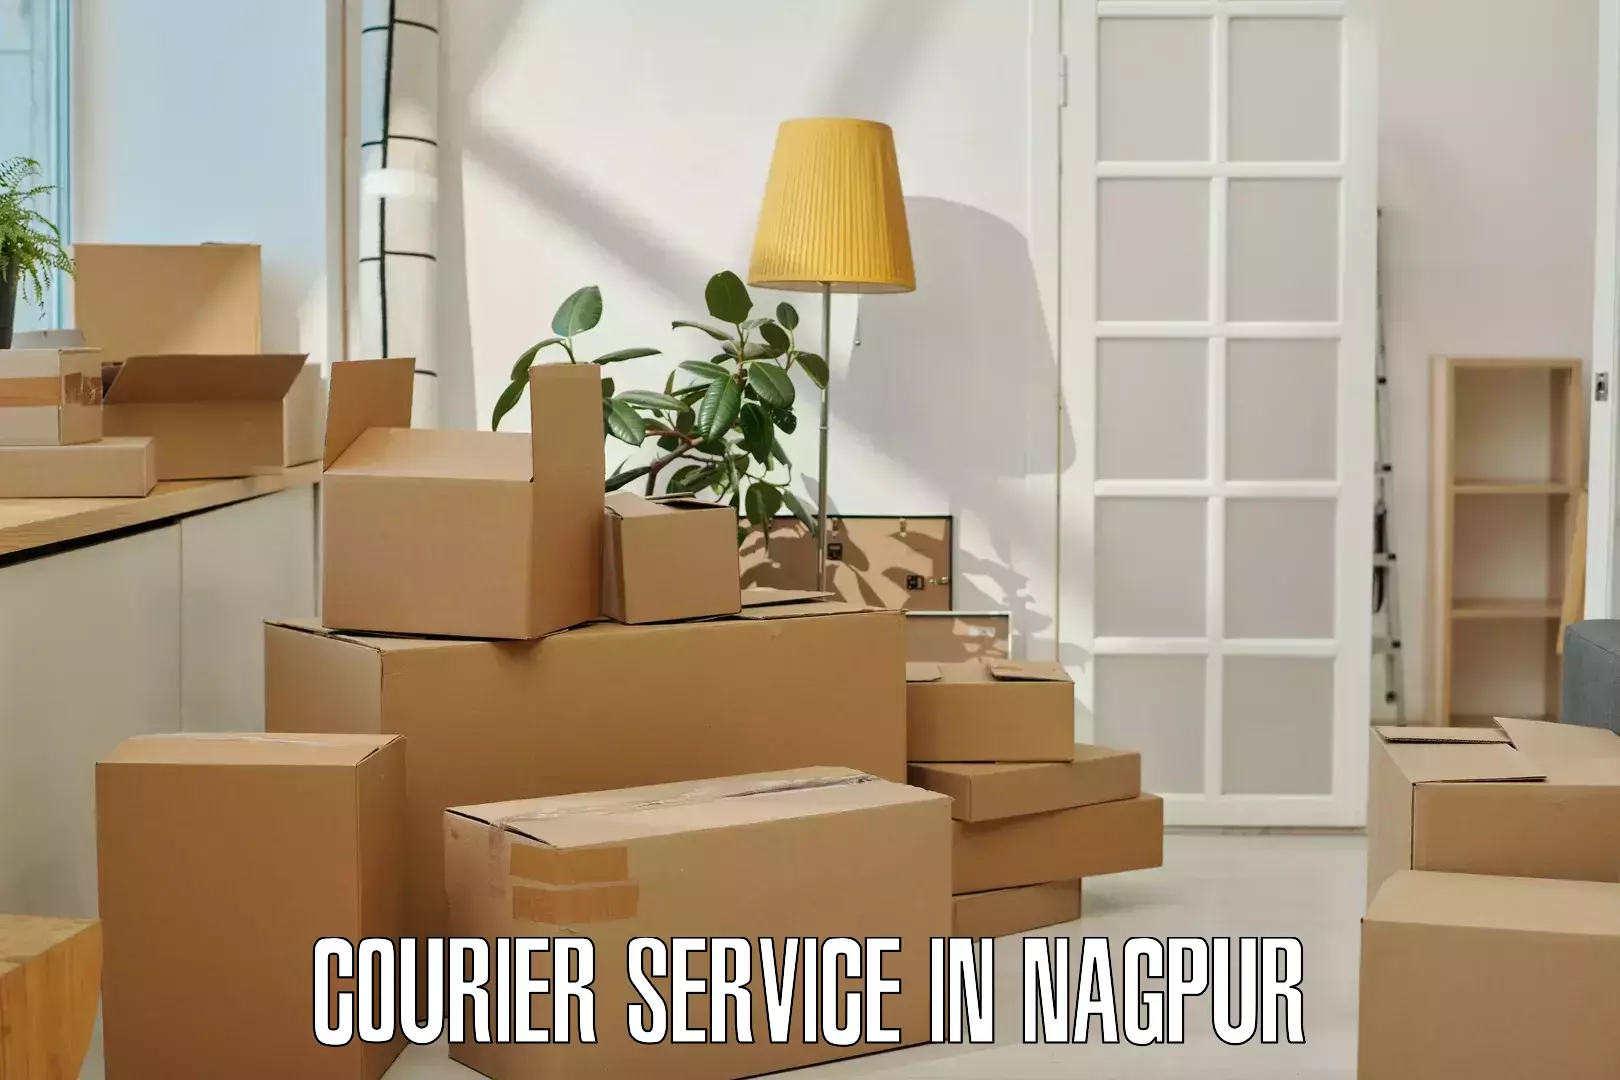 Personal parcel delivery in Nagpur